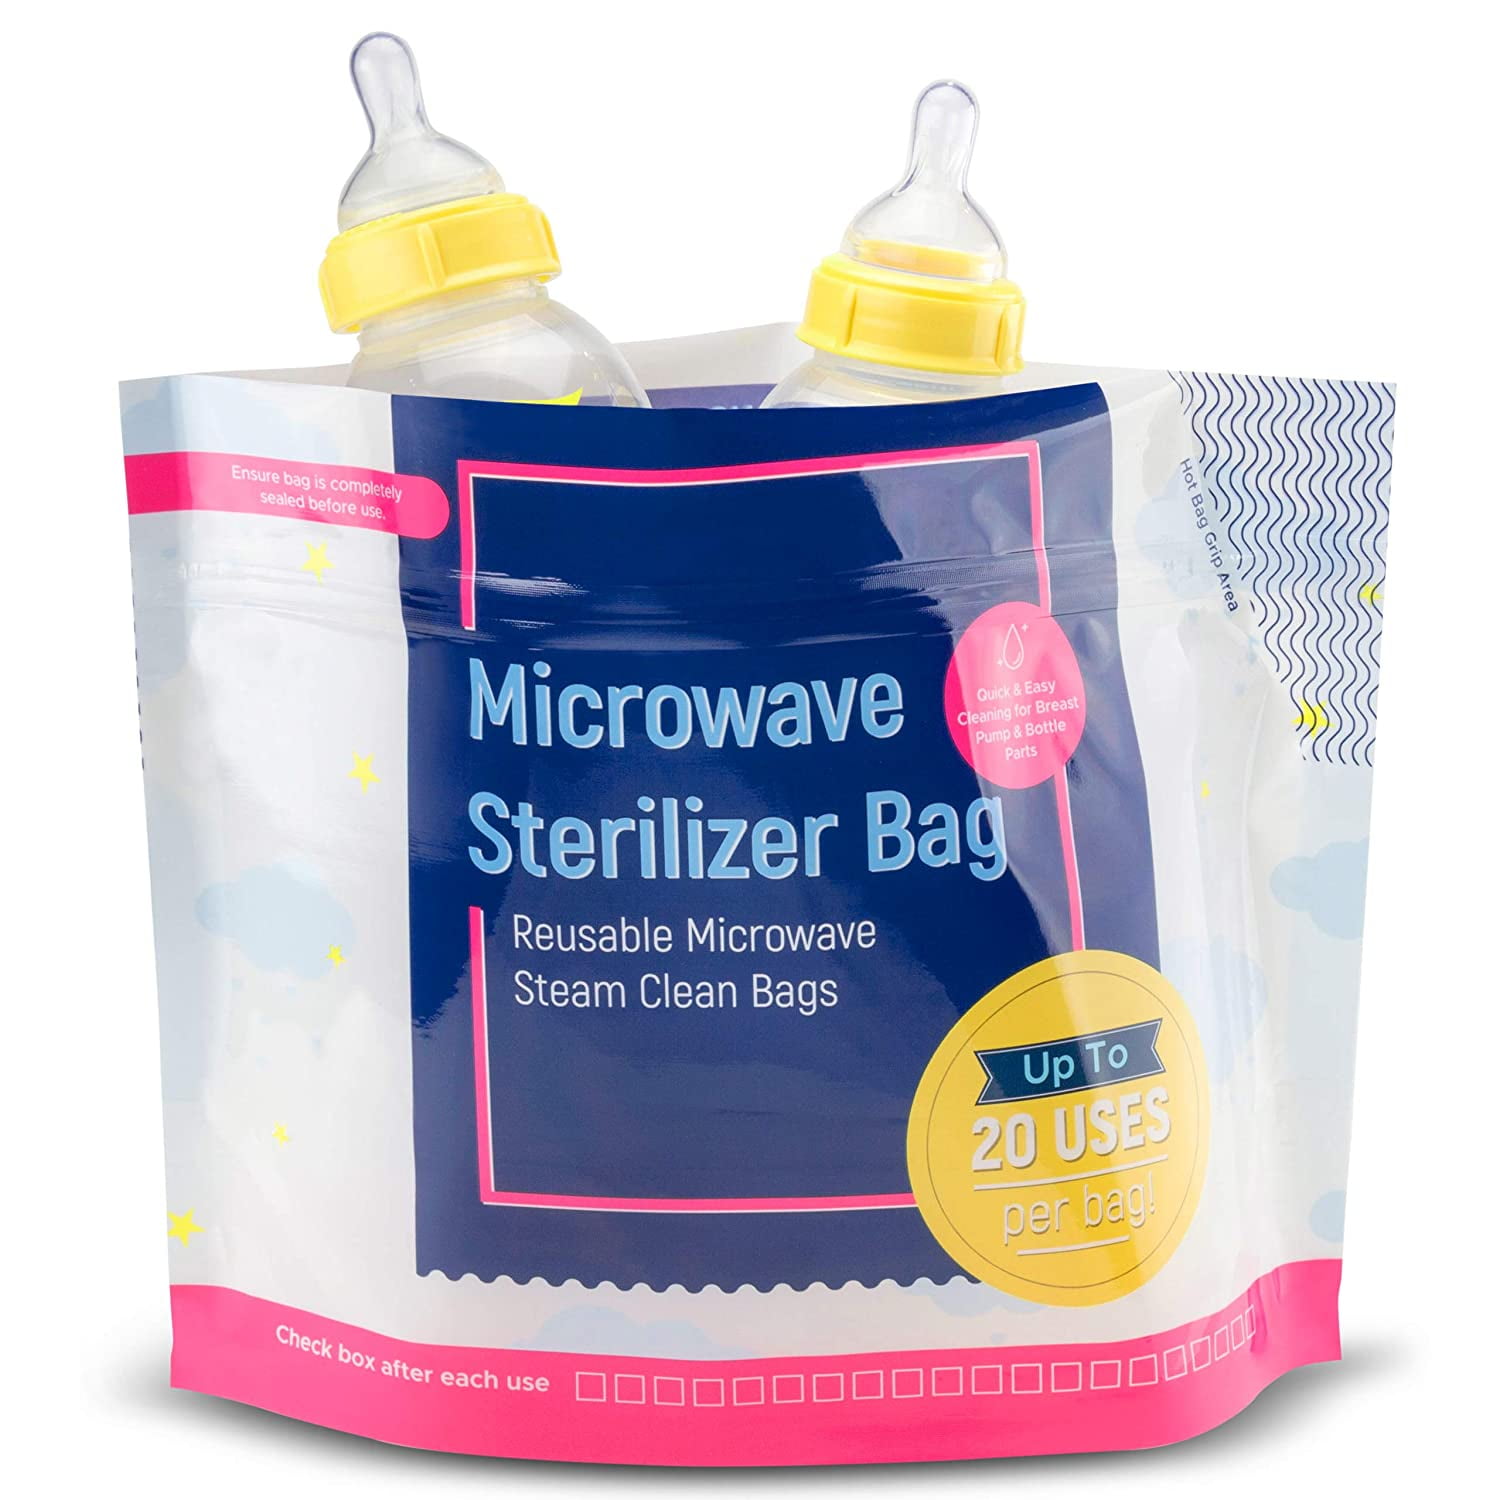 Momcozy Microwave Steam Sterilizer Bags, 15 Count Travel Sterilizer Bags  Reusable for Breast Pump Part/Baby Bottle, 20 Uses Per Bag, Breastpump  Accessories for Momcozy S9 Pro/S12 Pro/V1/V2, NOT for M5 - Yahoo